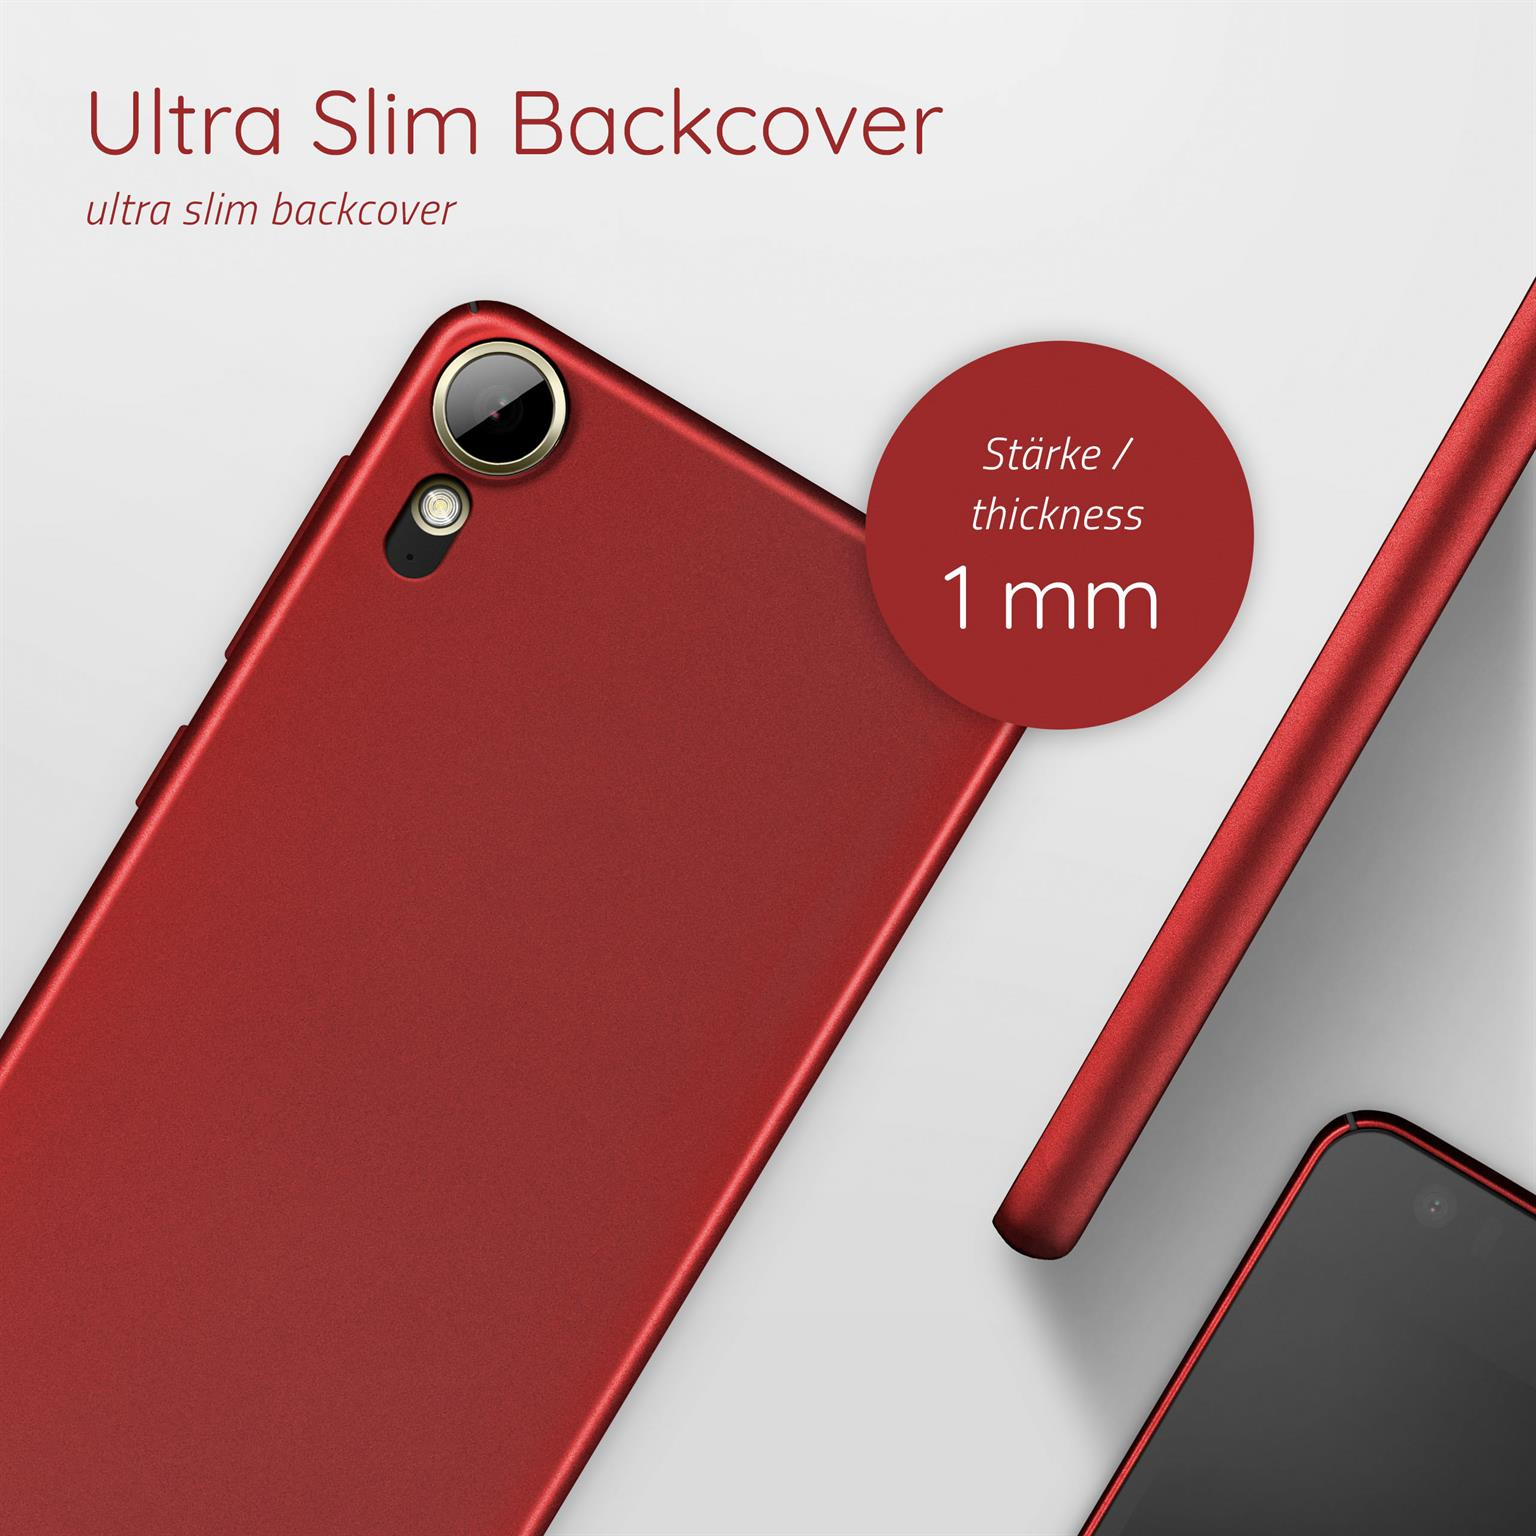 HTC, Backcover, Rot Lifestyle, Desire Case, 10 Alpha MOEX